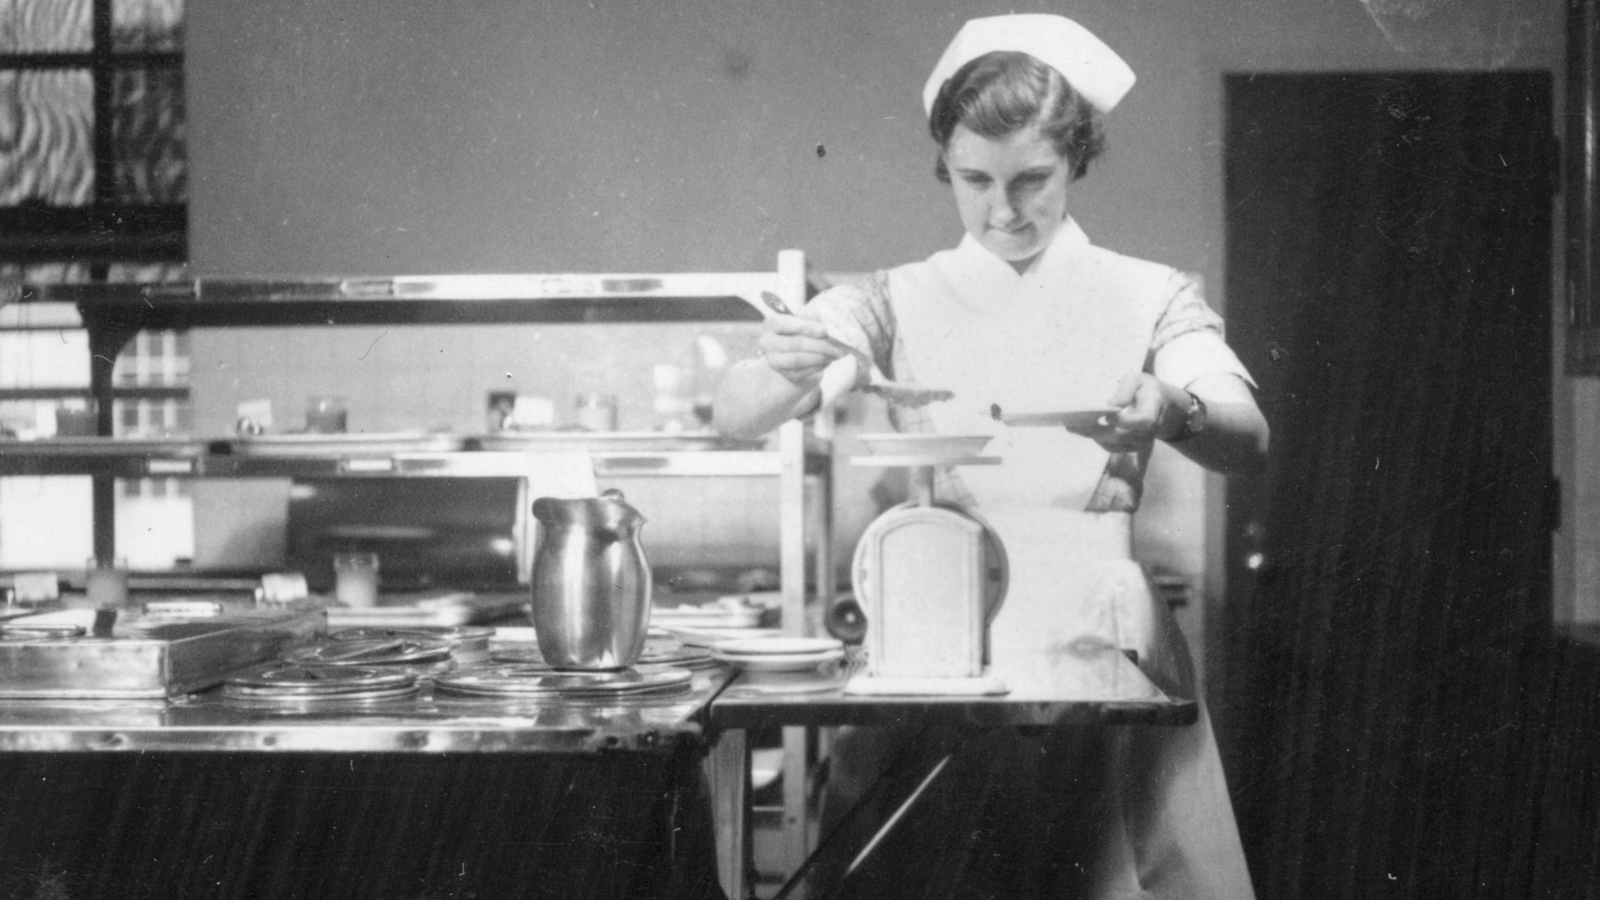 Working in the diet therapy laboratory, 1937